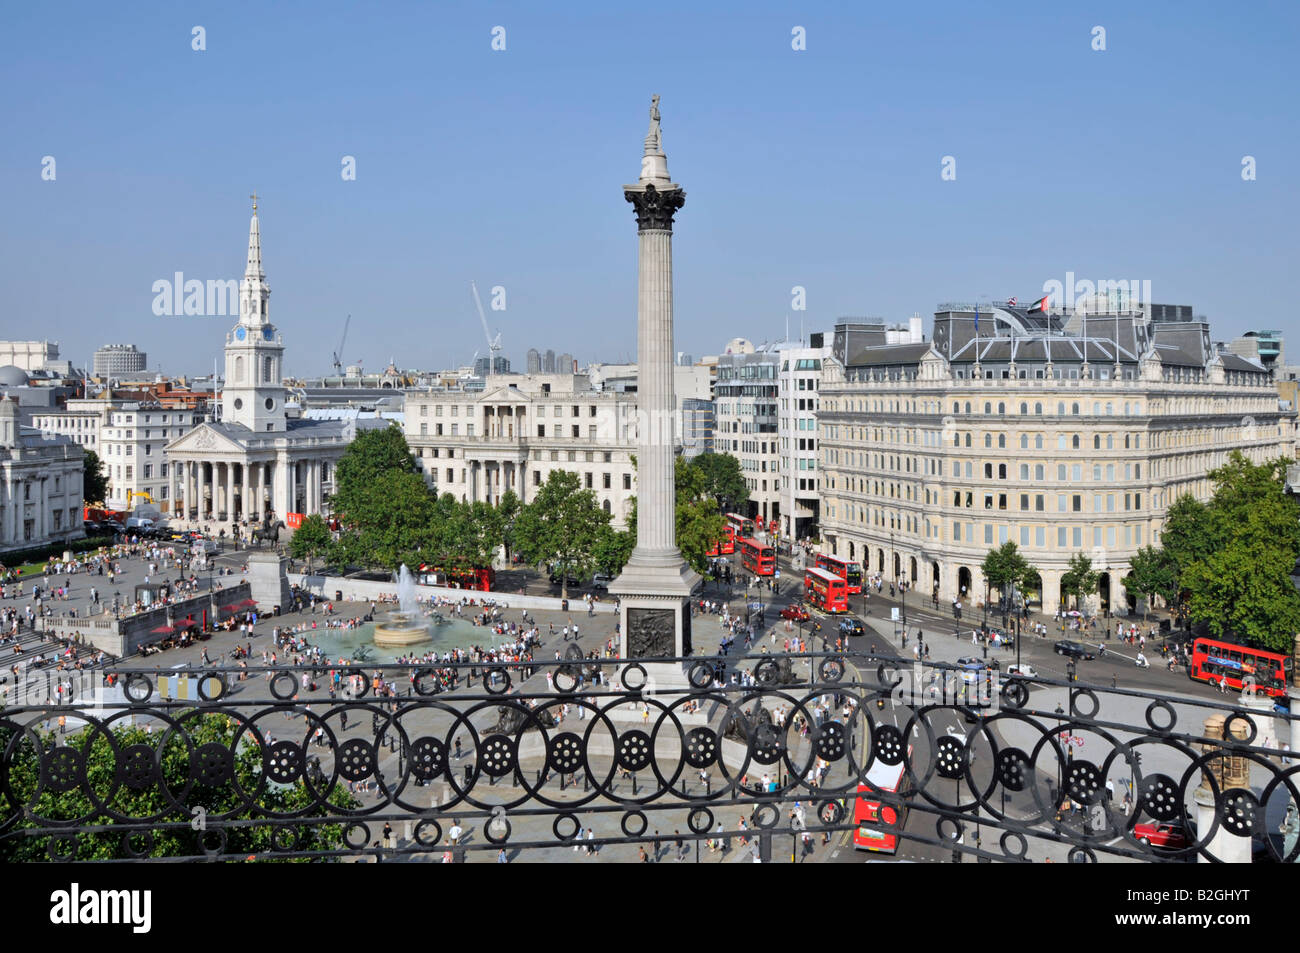 Aerial view of tourists & visitors in and around Trafalgar Square, includes St Martin in the Fields church fountain & Nelson column London England UK Stock Photo